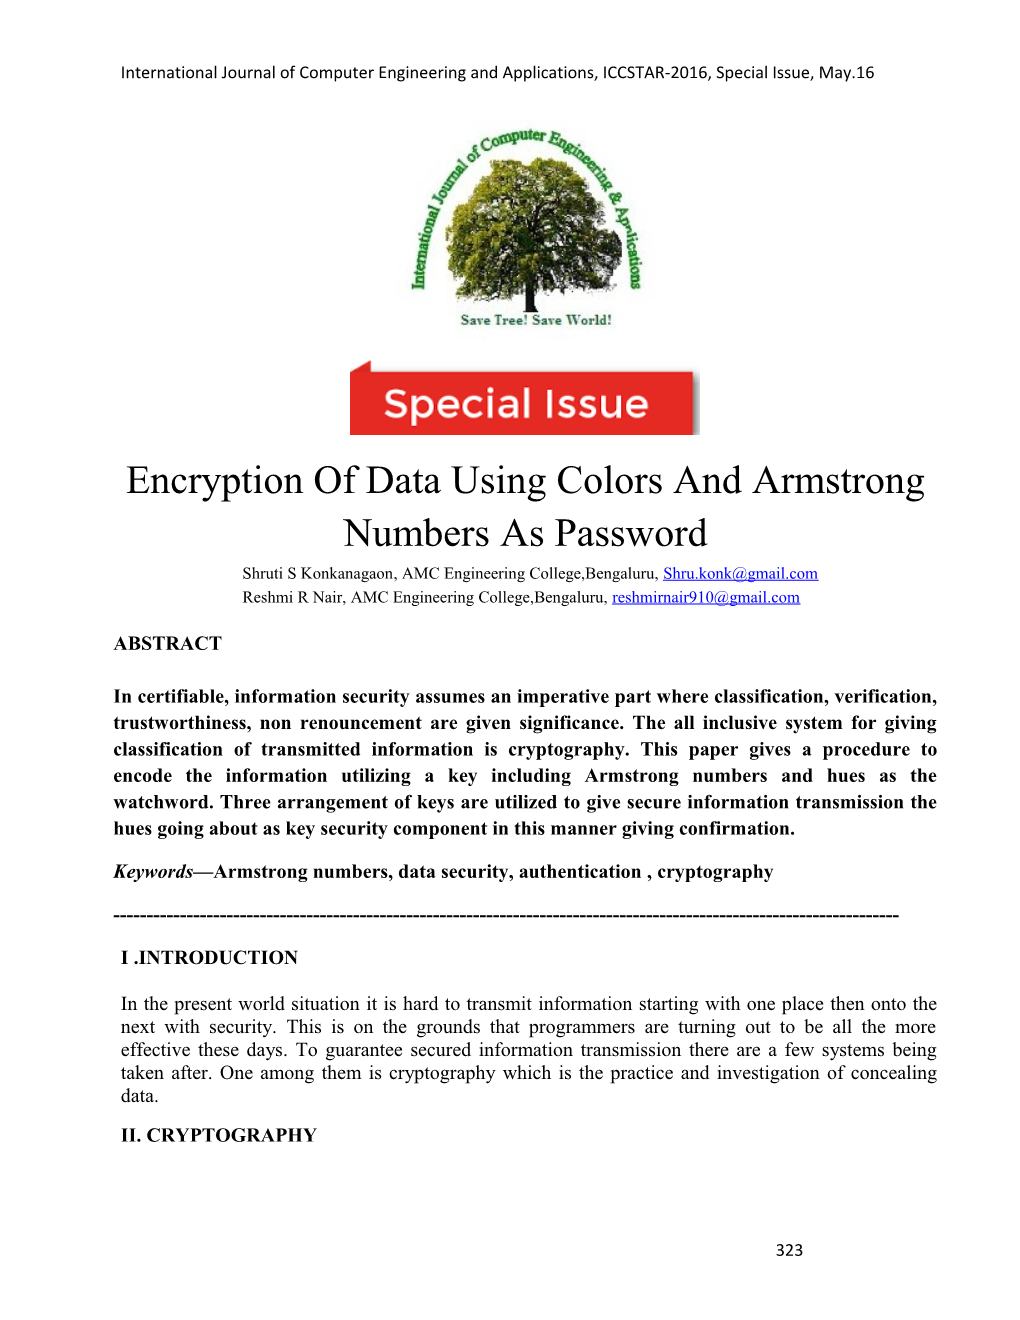 Encryption of Data Using Colors and Armstrong Numbers As Password